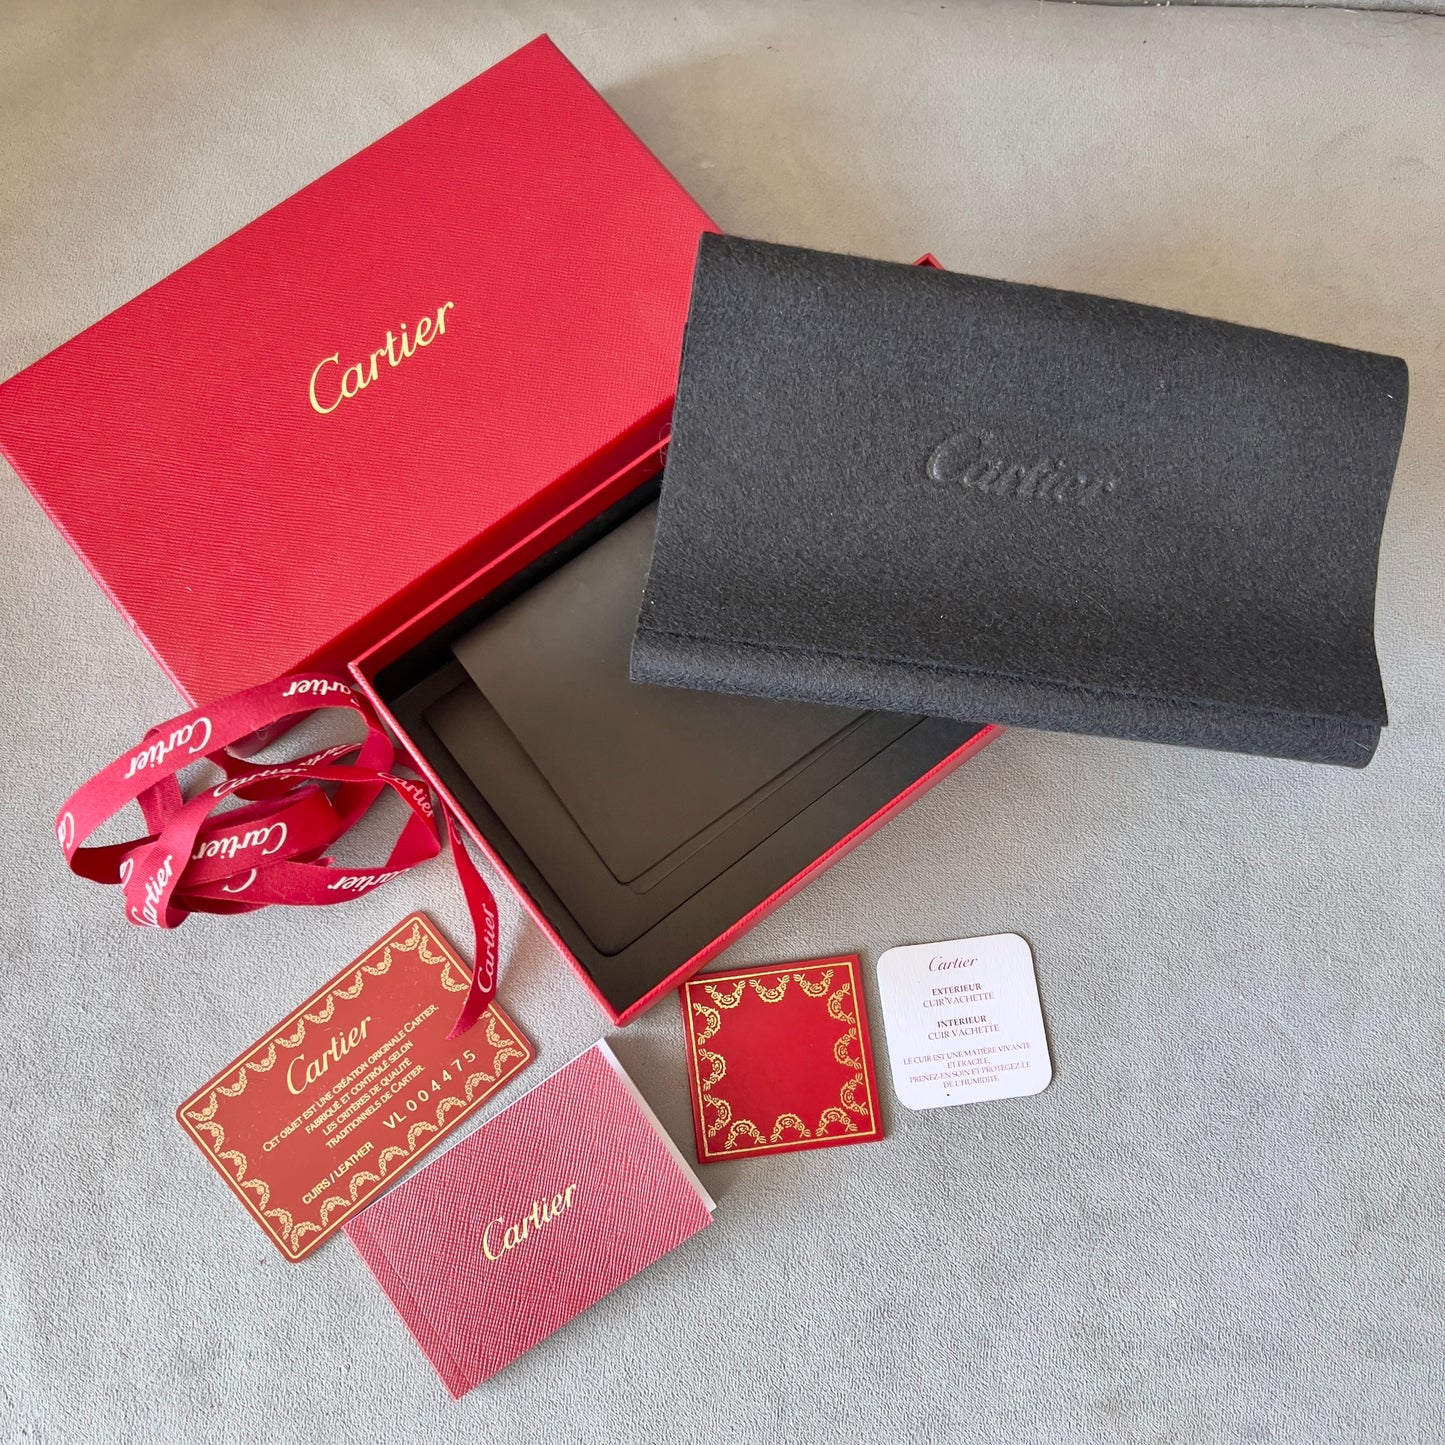 CARTIER Wallet Box 8x4.75x1.80 inches + Pouch + Booklets + Certificate + Ribbon